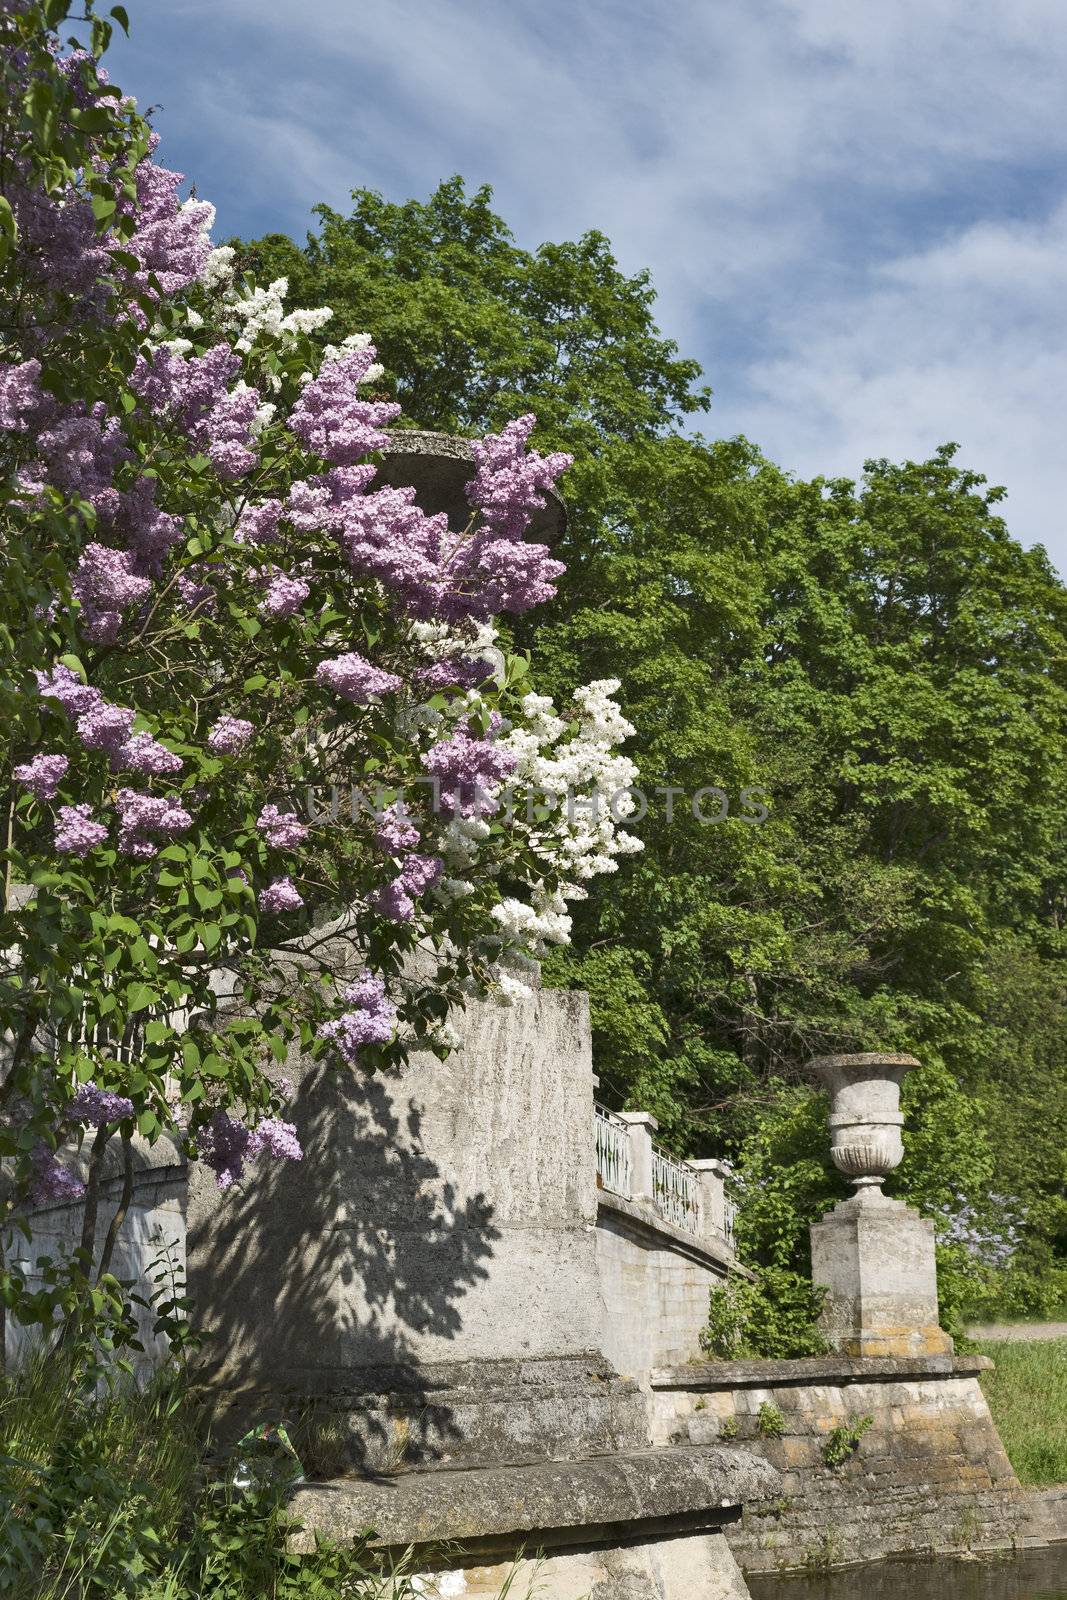 Blossoming lilac and ancient buiding in the park